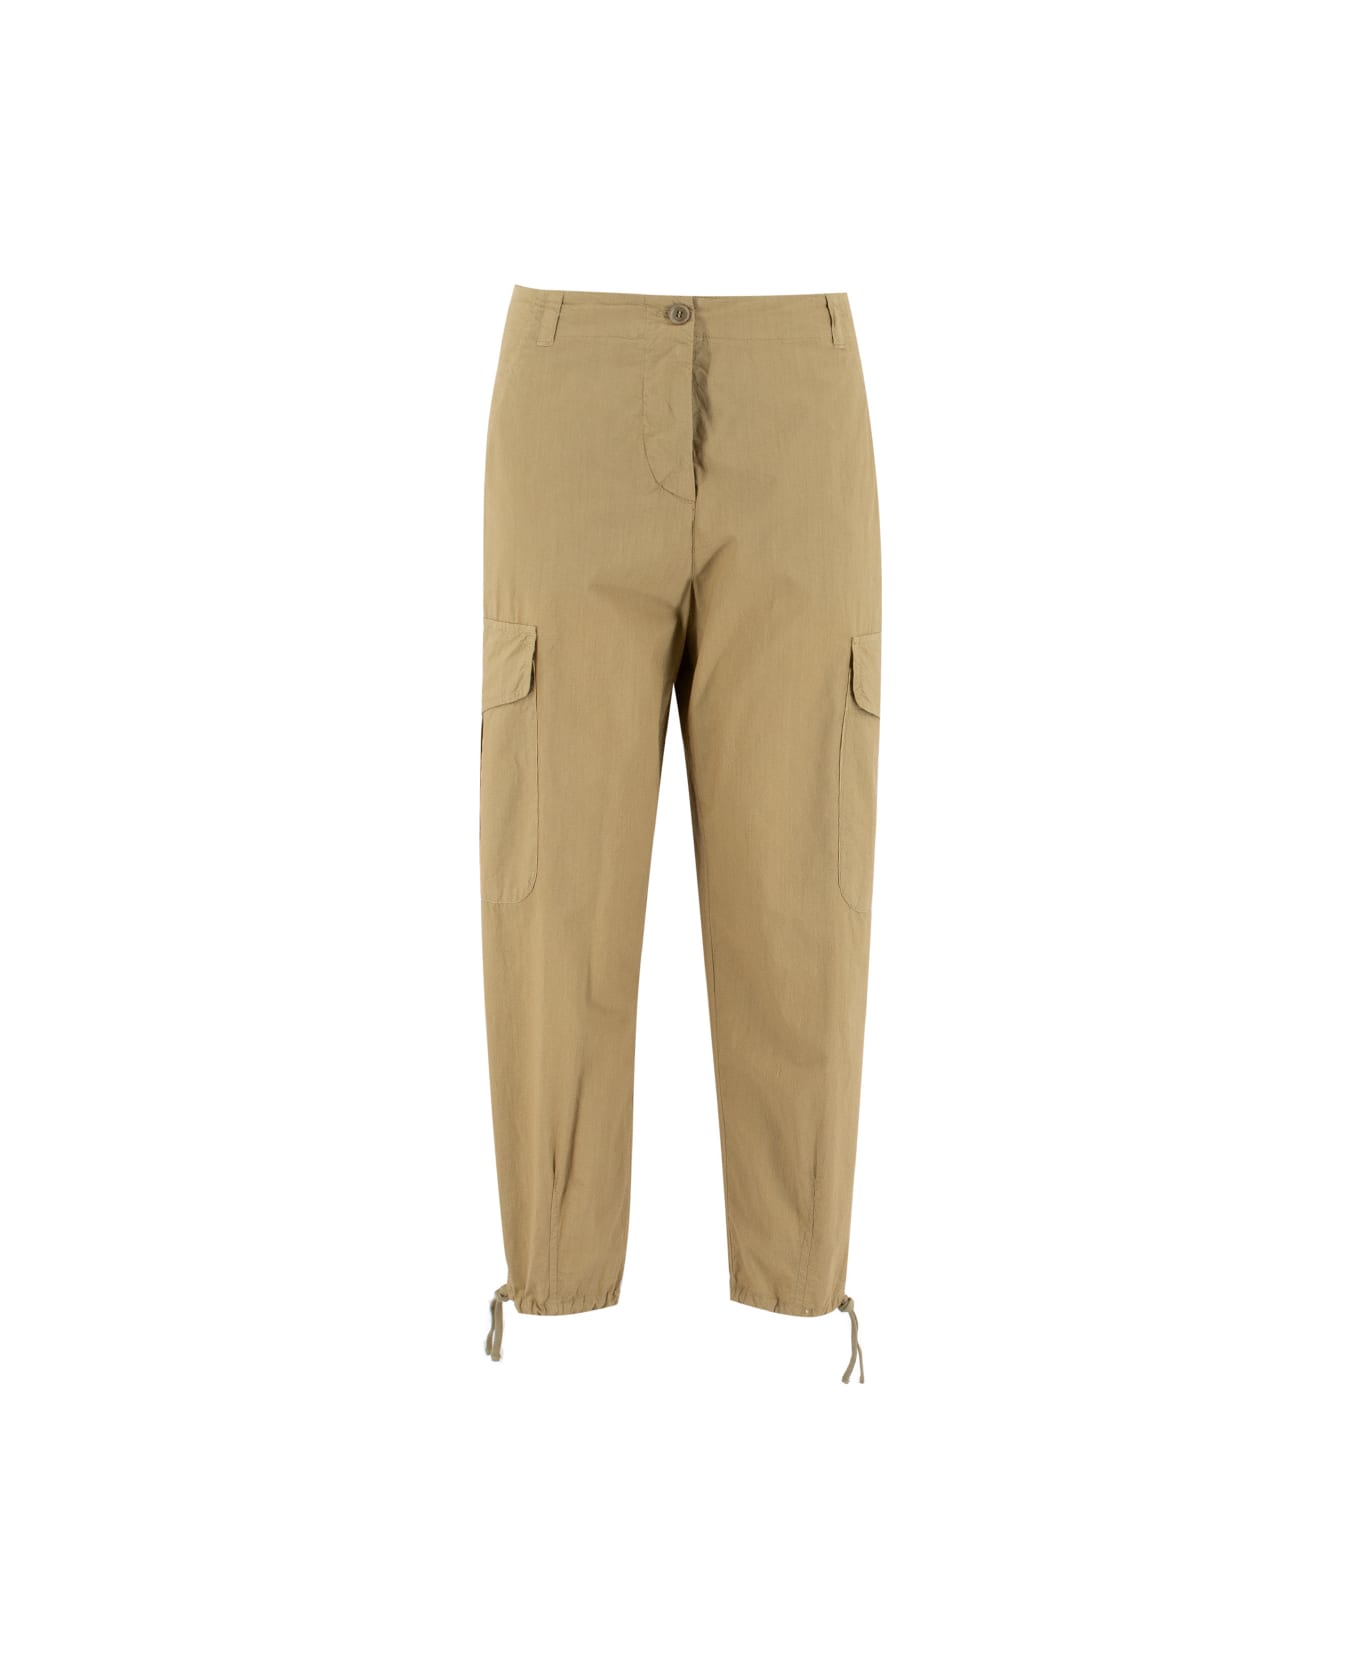 Aspesi Trousers - COLONIALE/COLONIAL BEIGE ボトムス